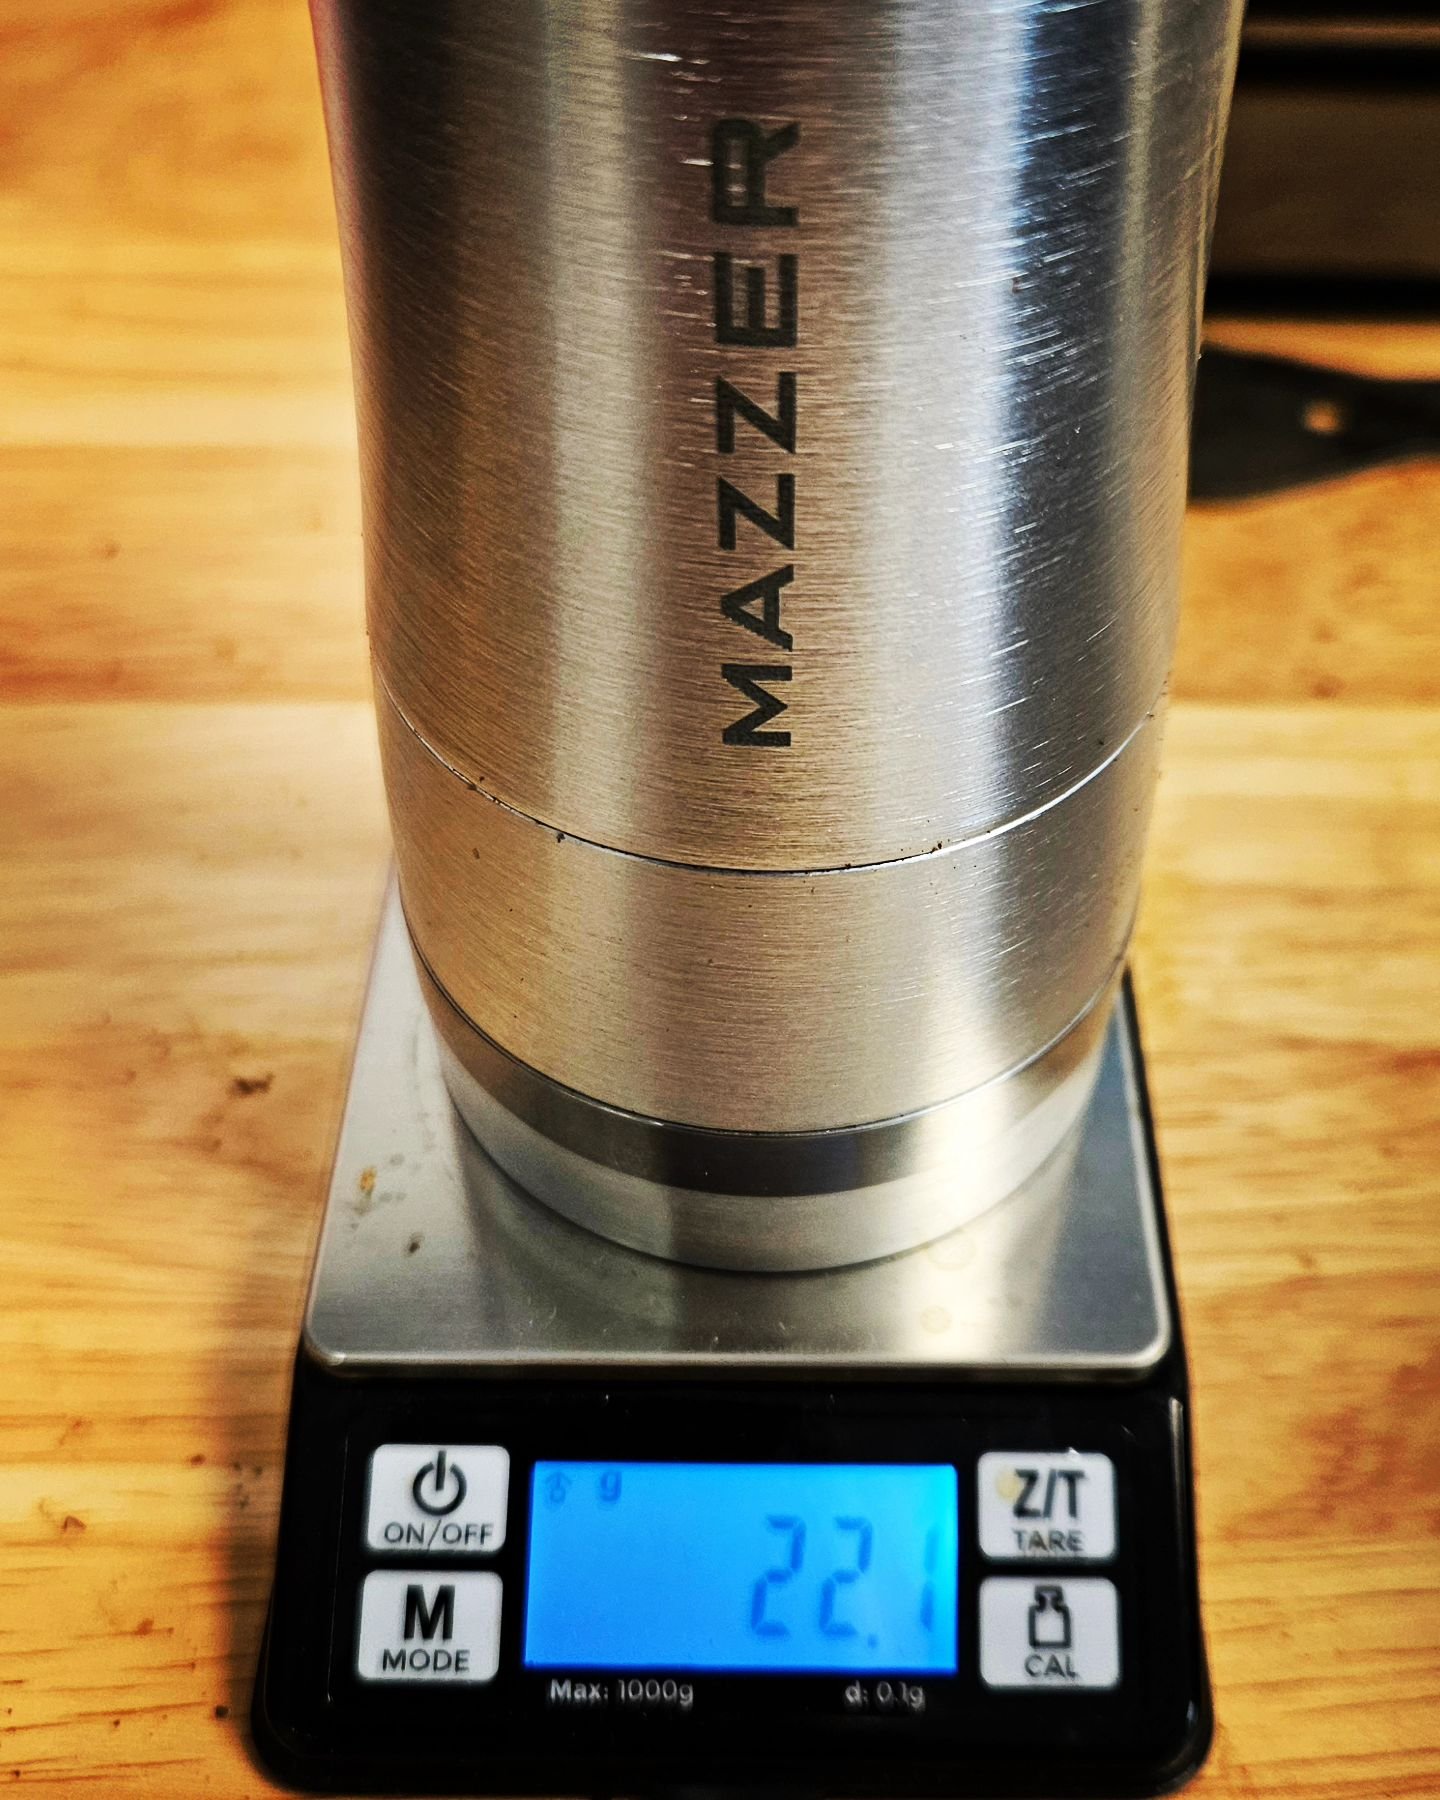 22 grams of @addictivecoffeeco Huehuetenango 

Grind setting 9.0 in the @mazzerofficial Omega( the bike geek in me loves the bearing quality, 👌)

203 F water for the pourover in the Kalita. 

Perfect way to start the Friday morning 🌄 in the studio.